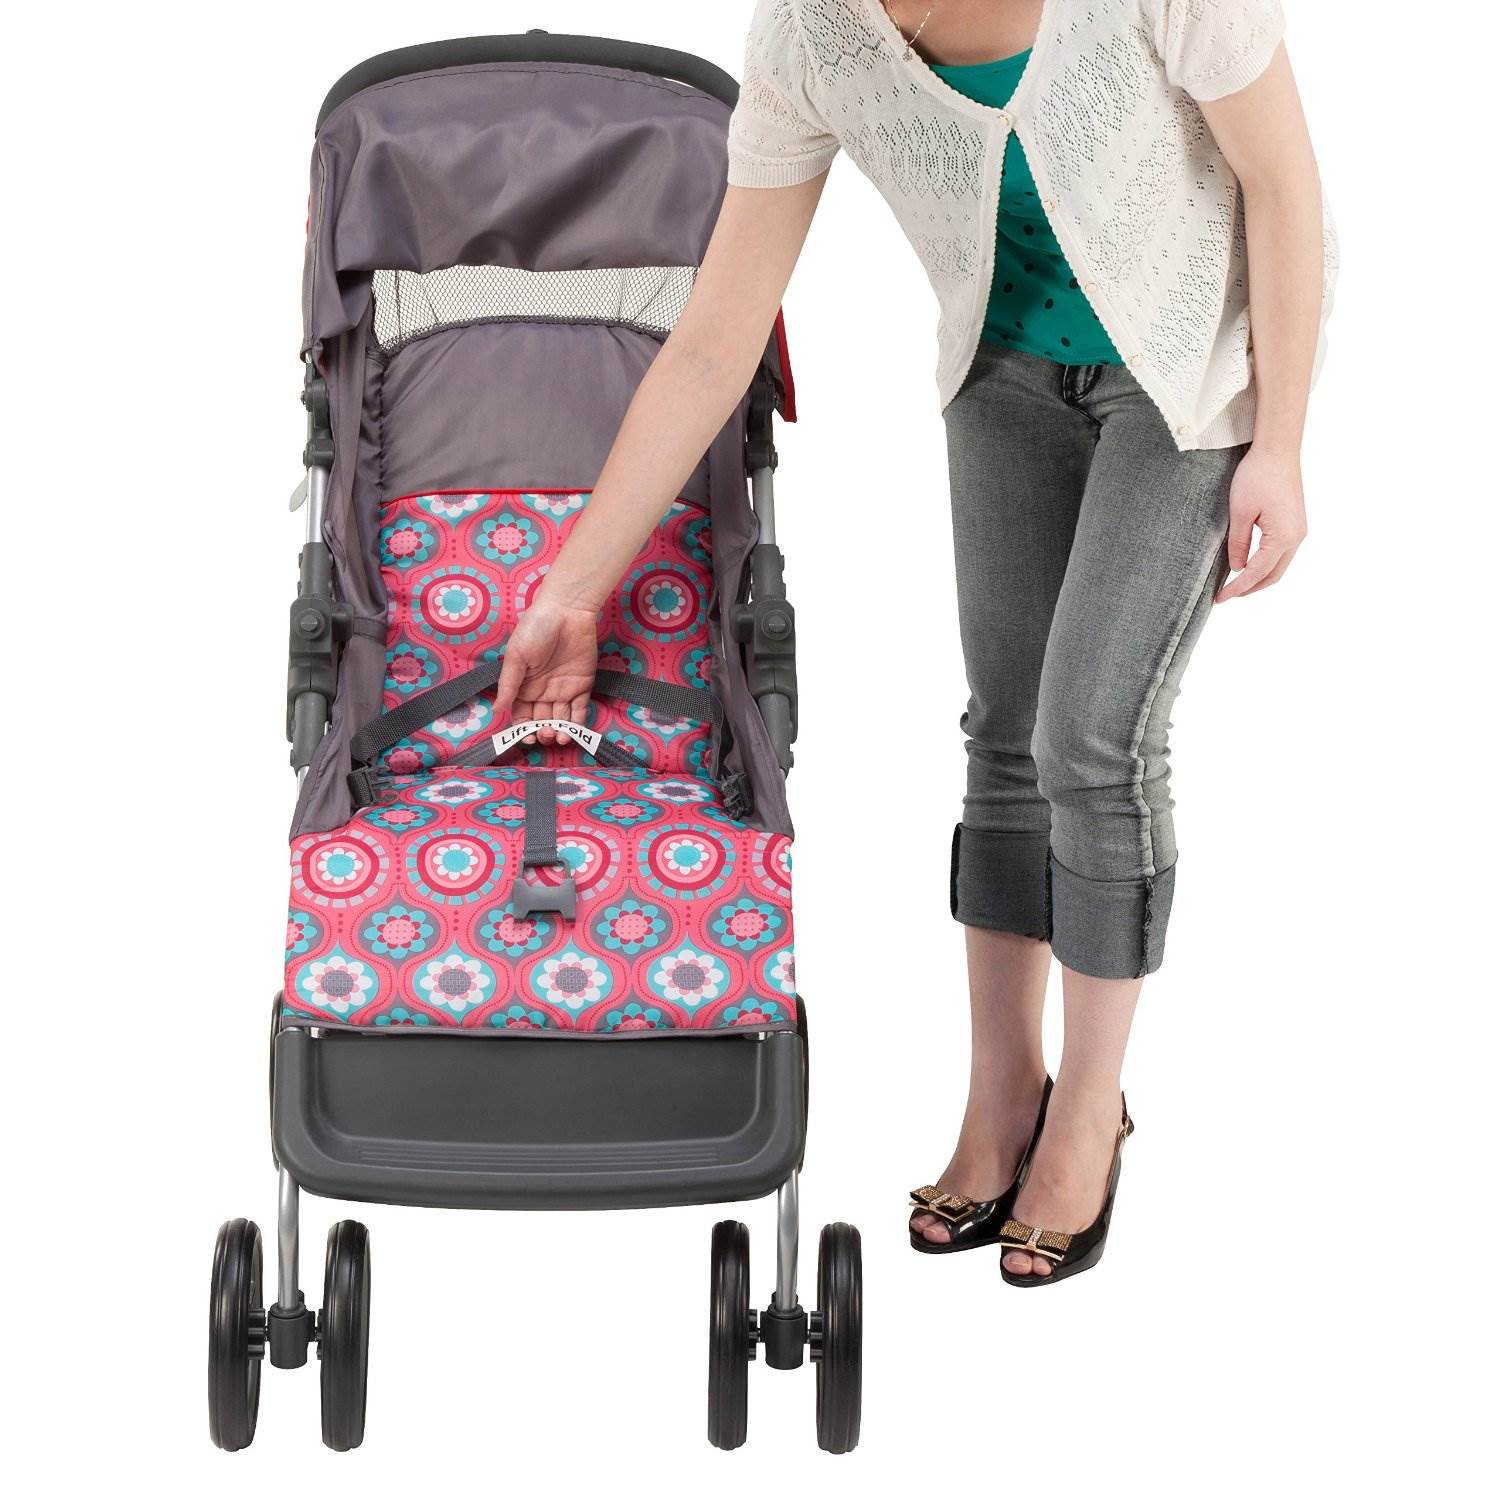 Cosco Lift &amp; Stroll Posey Pop Convenience Standard Stroller - image 3 of 8